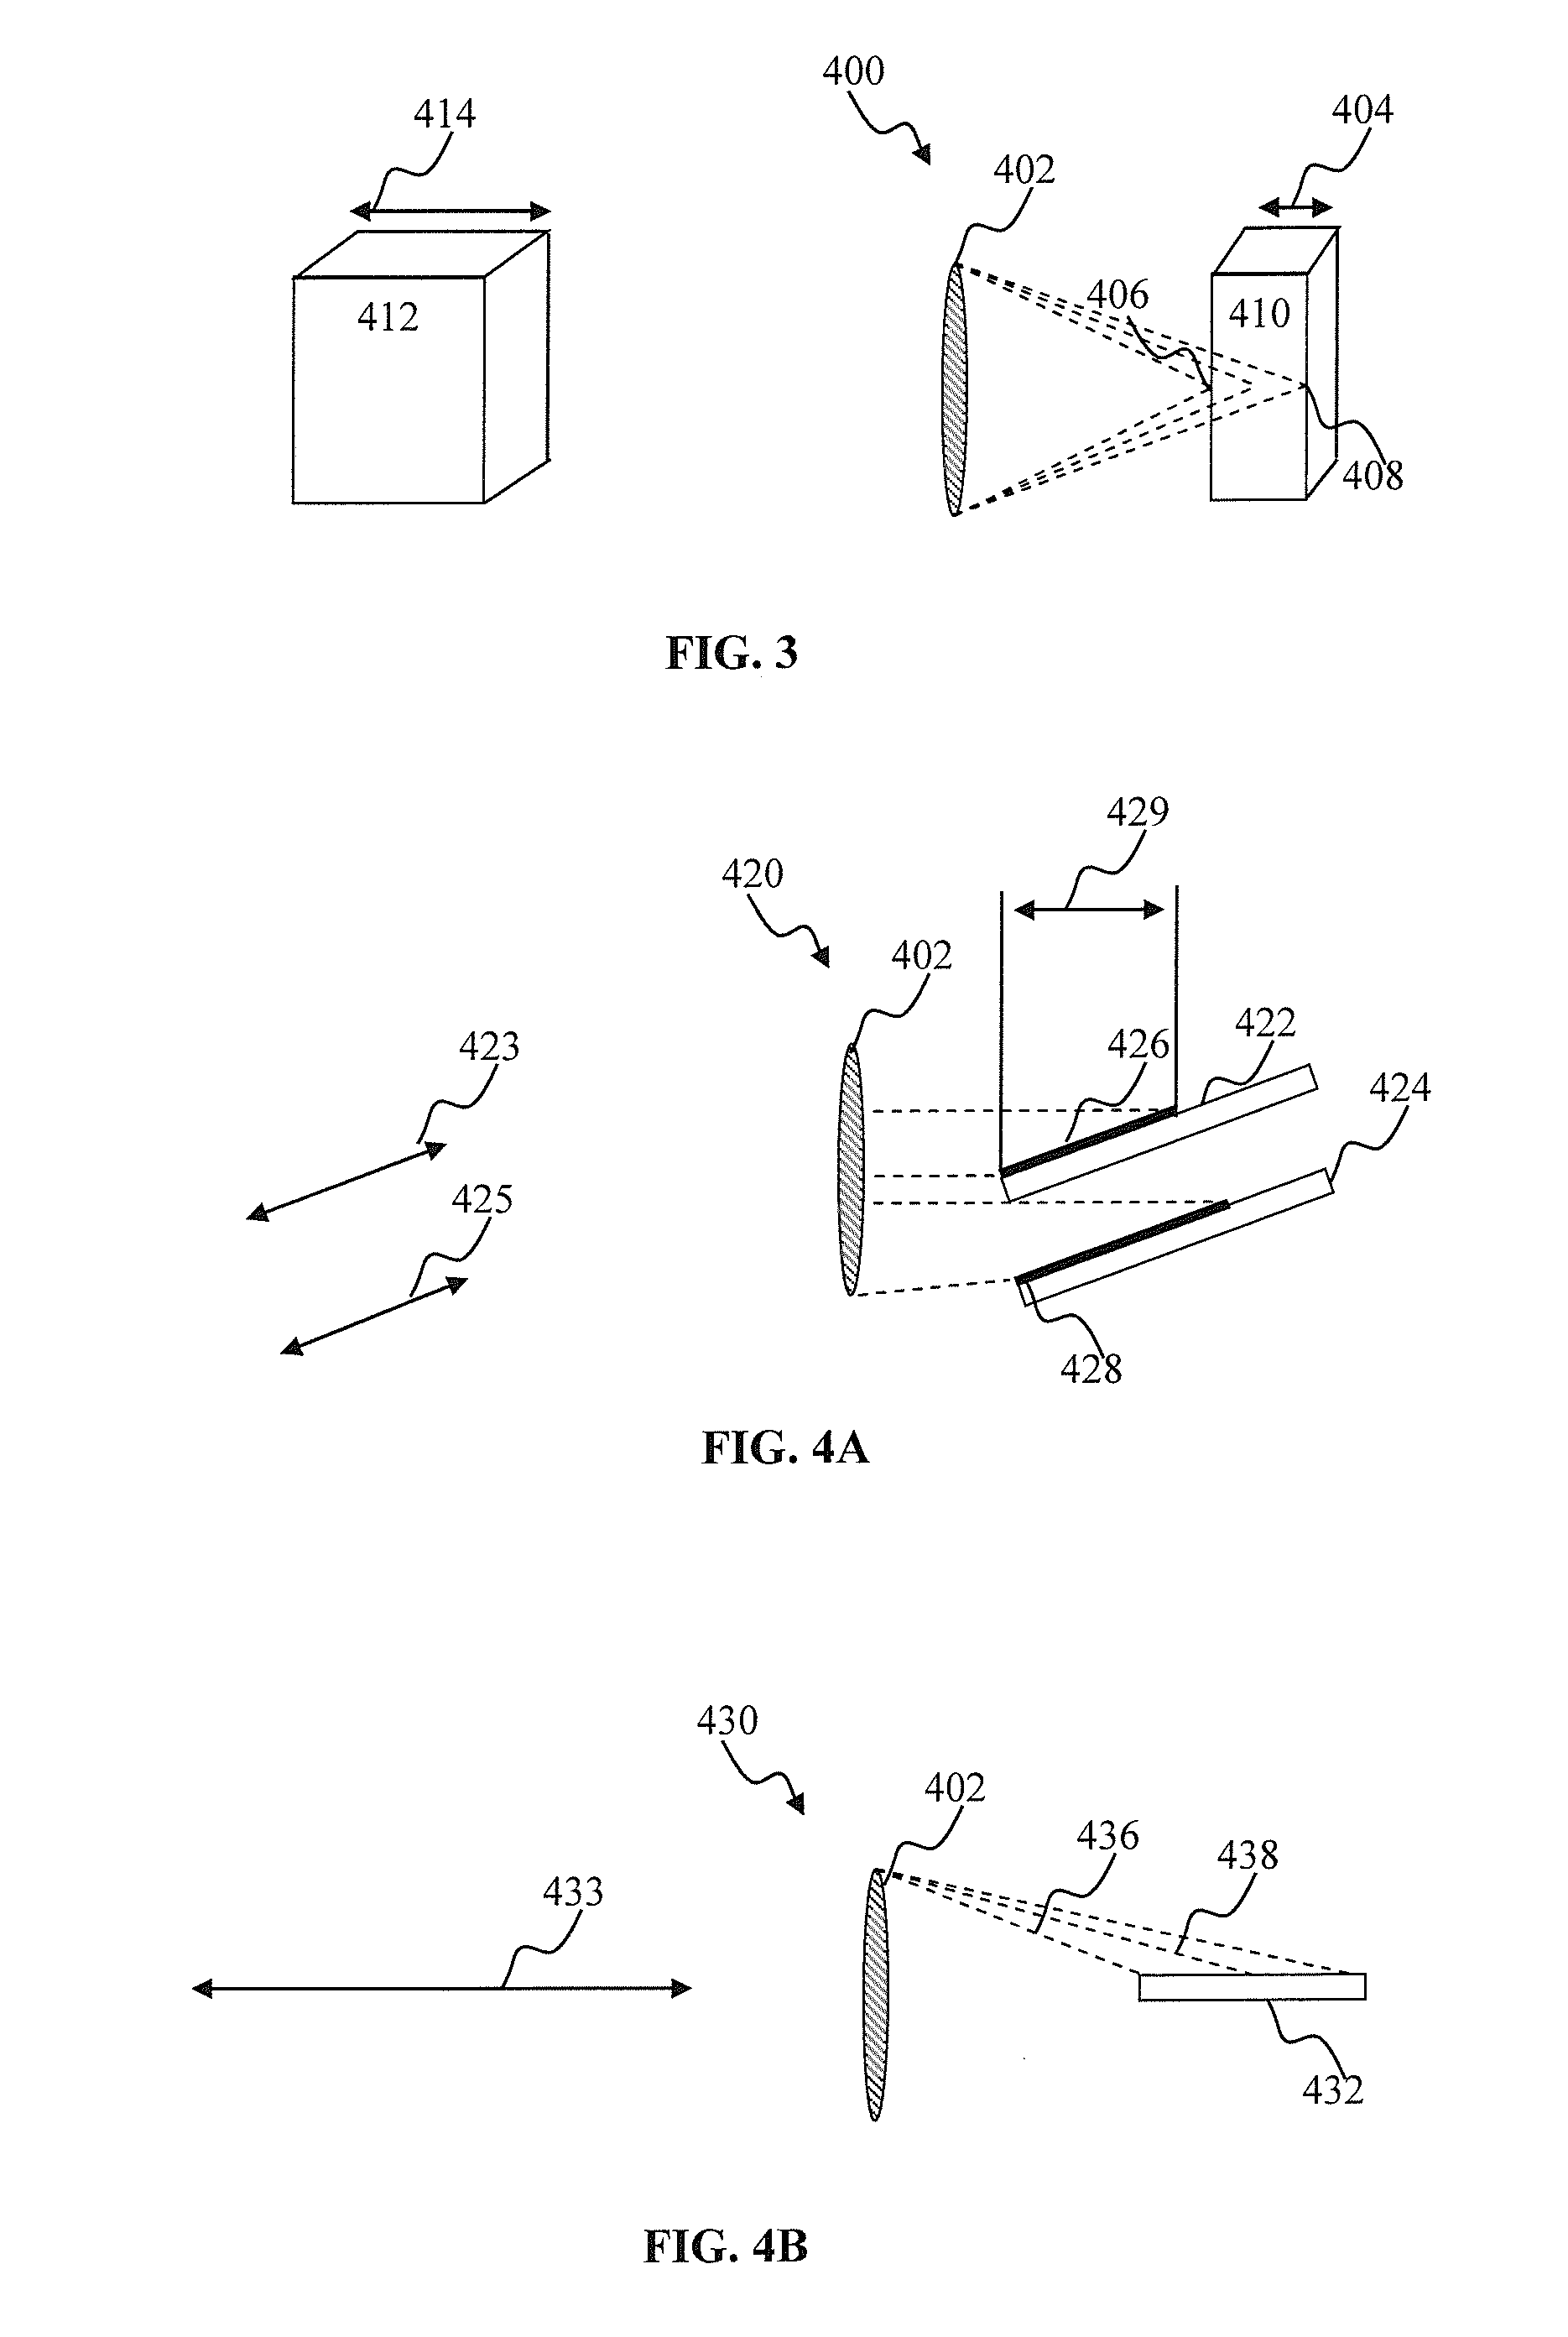 Optical detection apparatus and methods